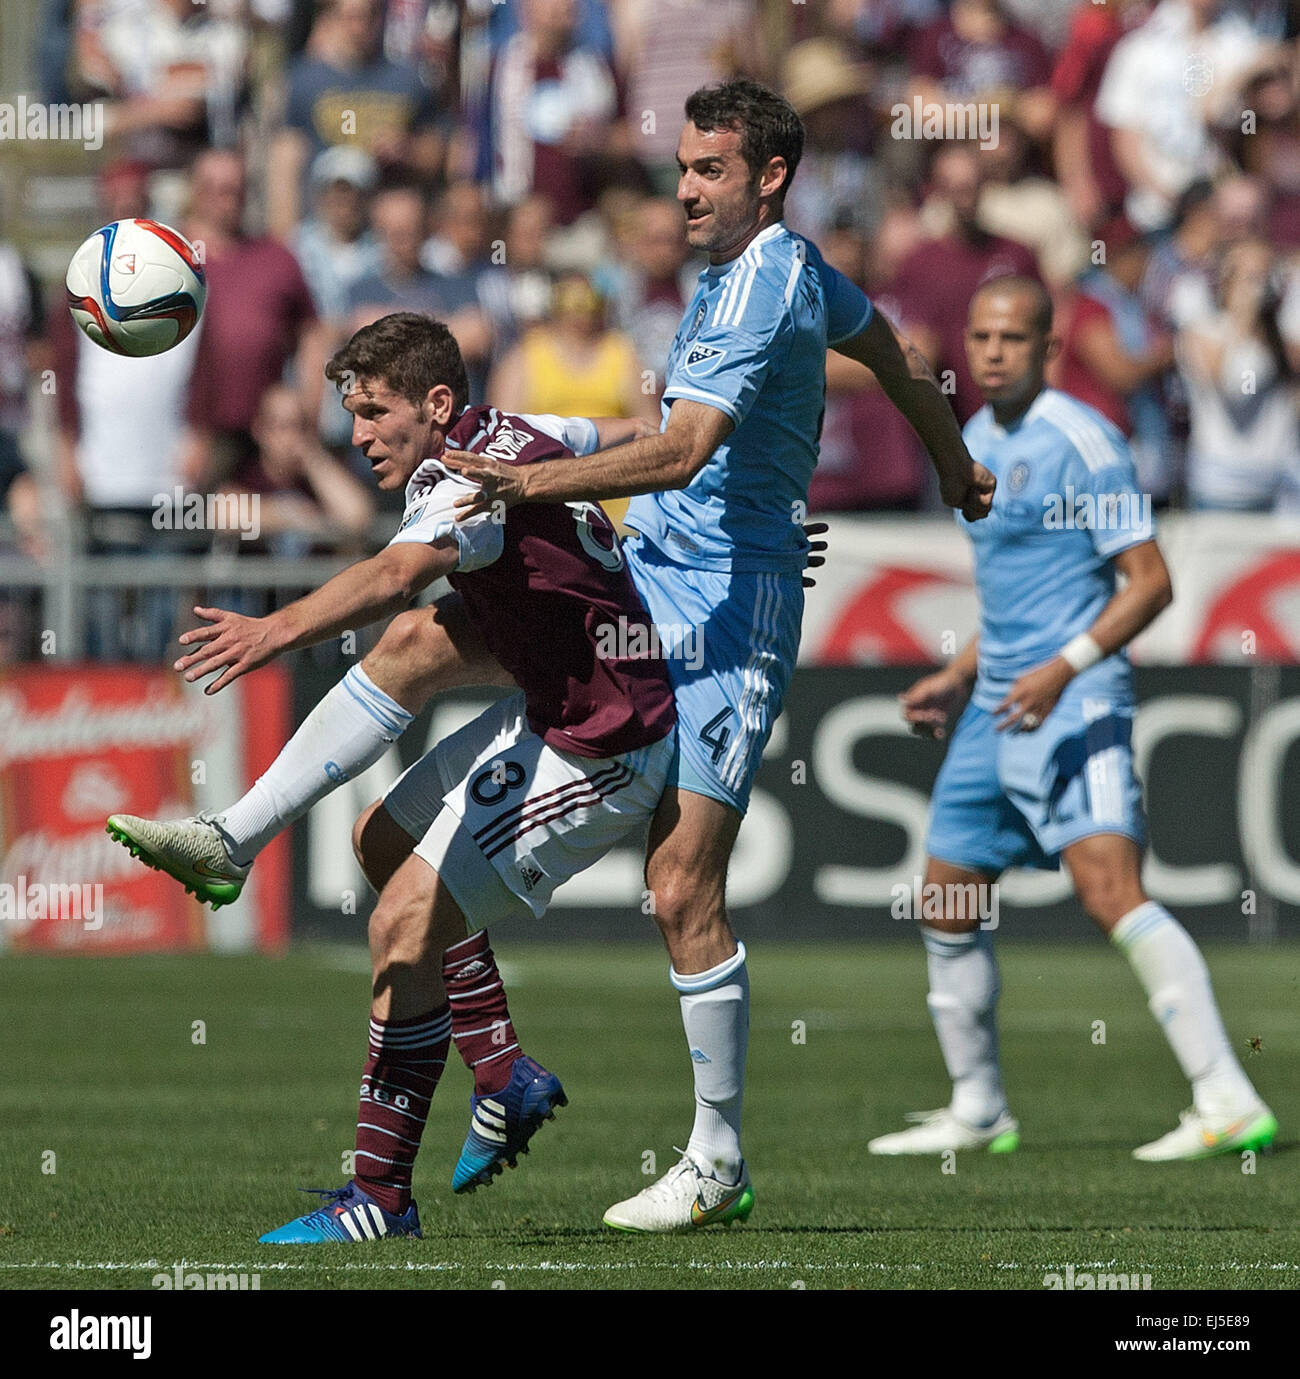 Commerce City, Colorado, USA. 21st Mar, 2015. Rapids MF DILLON POWERS, left, battles for control of the ball with NY MF ANDREW JACOBSON, center, during the 1st. Half at Dicks Sporting Goods Park during the Rapids Home Opener Saturday afternoon. Rapids & New York City FC draw to 0-0. © Hector Acevedo/ZUMA Wire/Alamy Live News Stock Photo